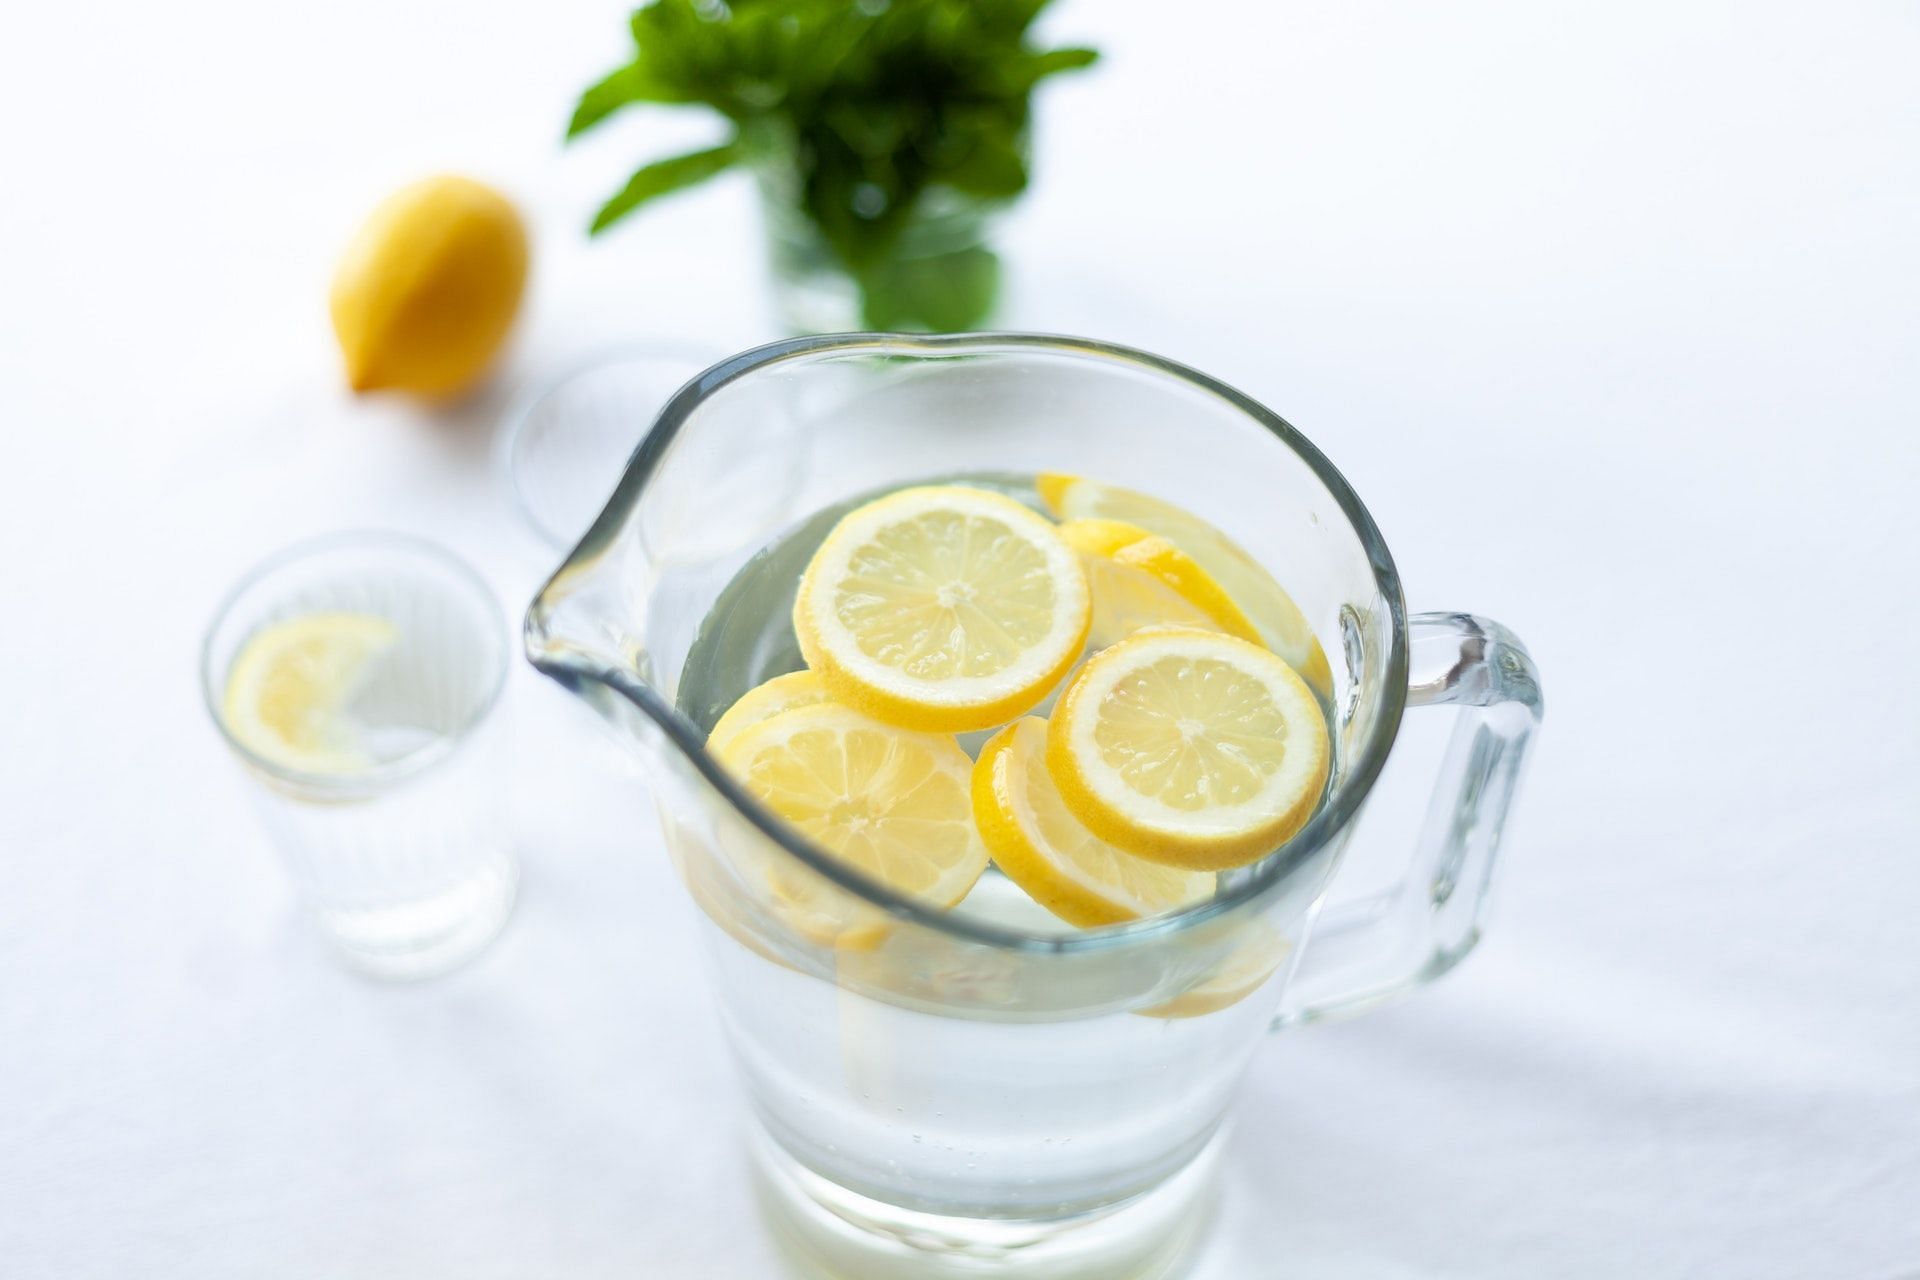 There are several disadvantages of drinking lemon water daily. (Photo via Pexels/Julia Zolotova)